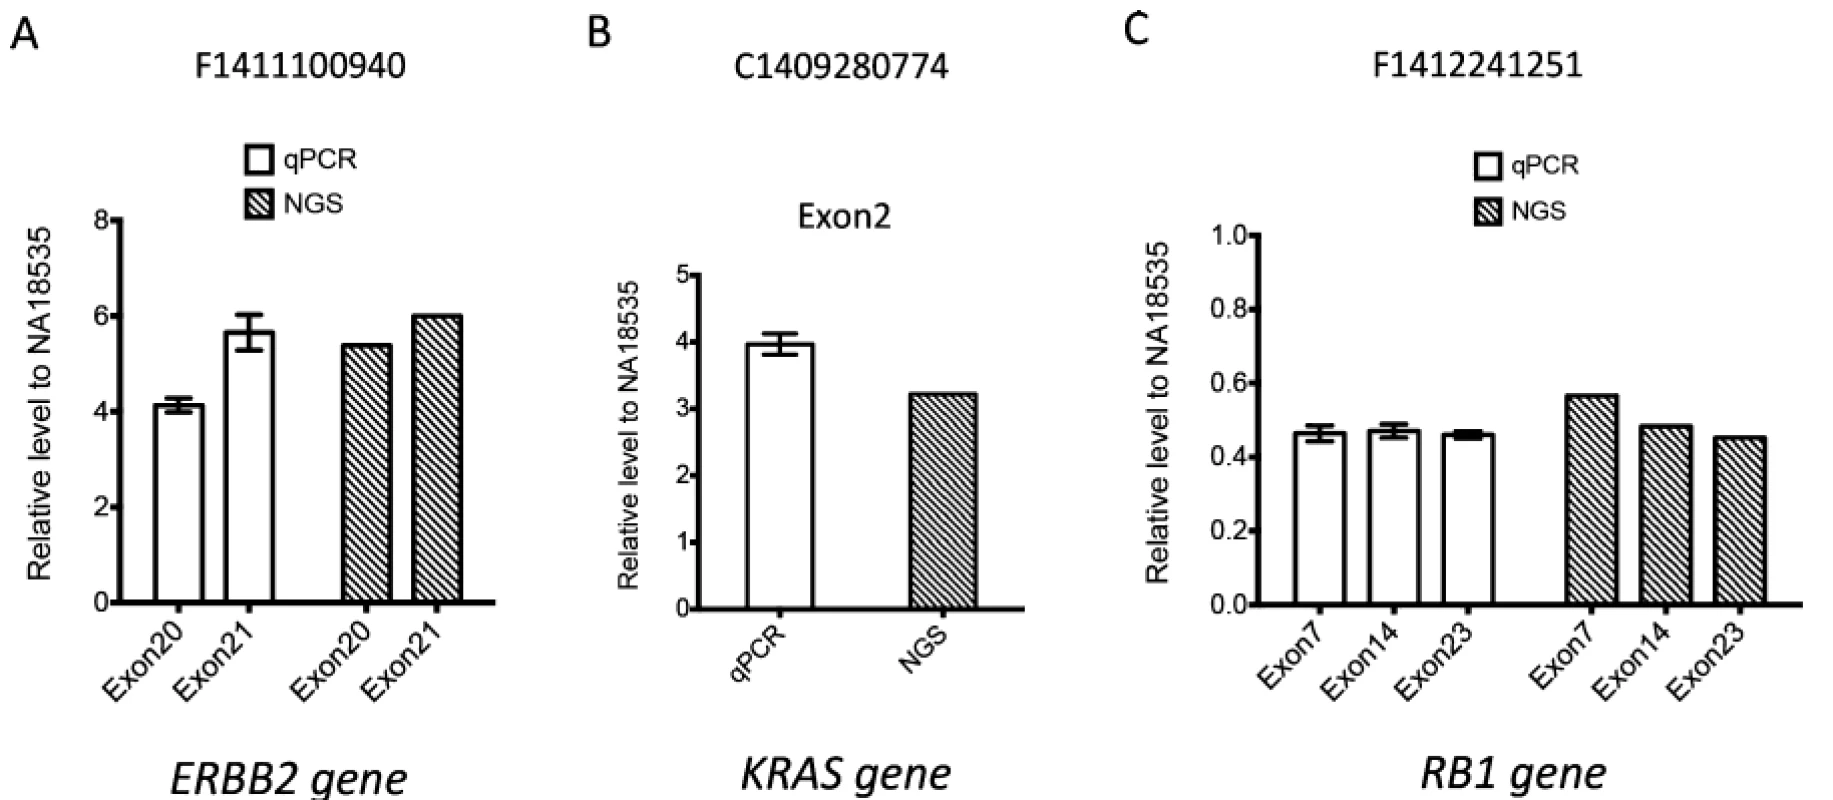 Validation of gene amplification by quantitative PCR (qPCR). Relative levels of amplified exons of three representative genes ERBB2 (A), KRAS (B) and RB1 (C) identified by next-generation sequencing (NGS) were detected by qPCR, which was further normalized by the relative level of reference ZNF80 gene region. The fold change for certain exon was calculated by normalizing to its relative level in normal control sample NA18535. Each value represents the mean  SEM of three independent experiments for qPCR results. Copy number change detected by NGS was also plotted together with qPCR data on the right.